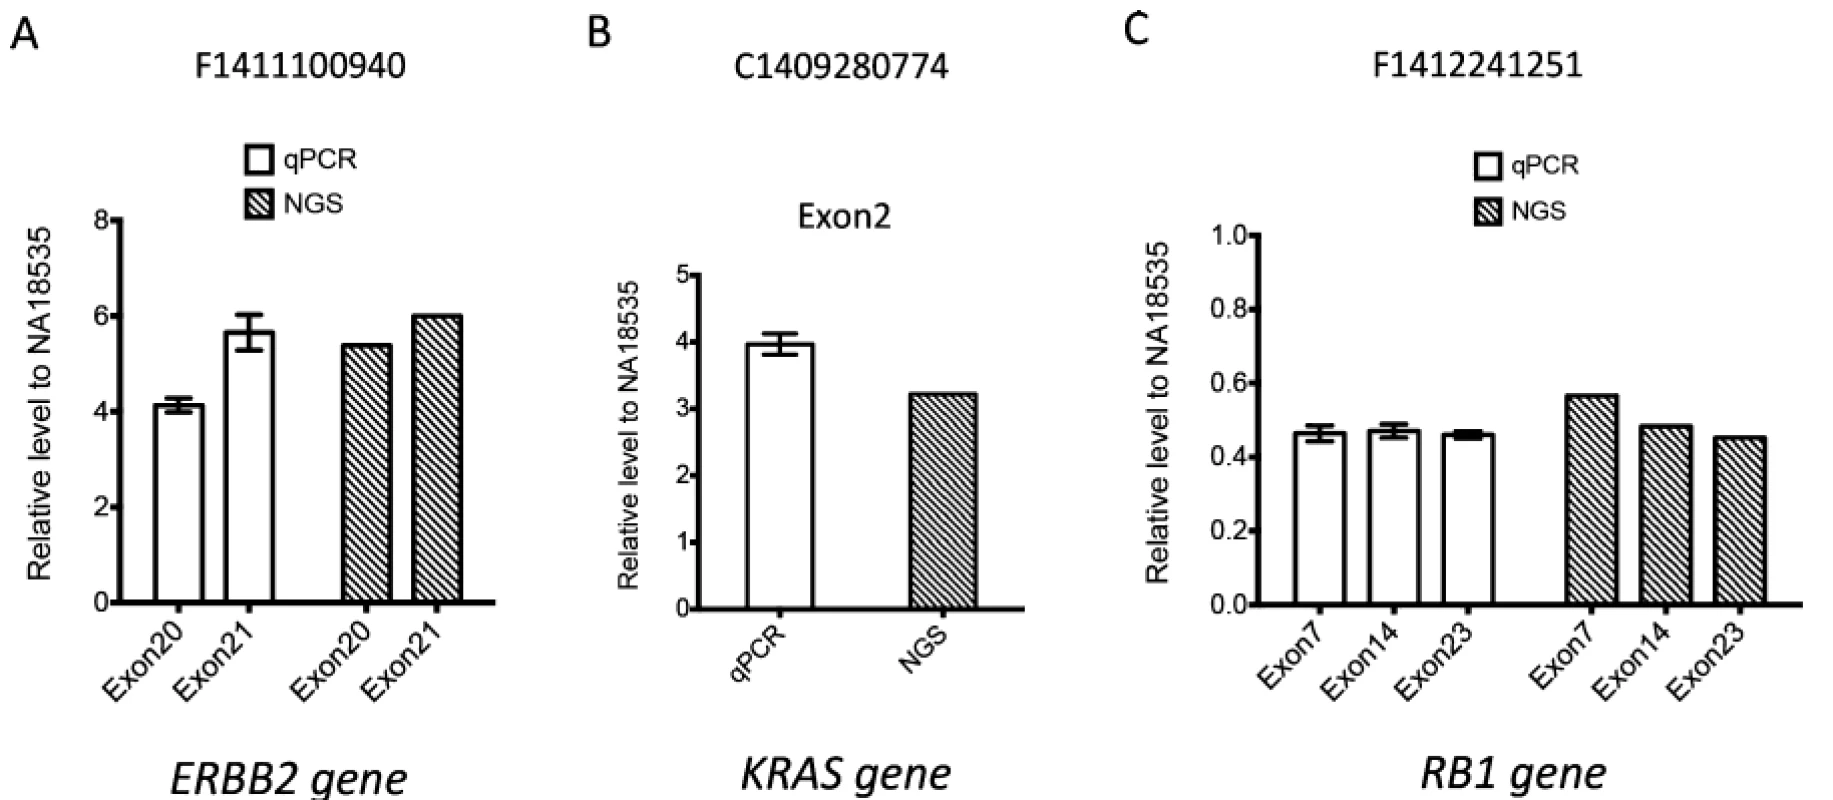 Validation of gene amplification by quantitative PCR (qPCR). Relative levels of amplified exons of three representative genes ERBB2 (A), KRAS (B) and RB1 (C) identified by next-generation sequencing (NGS) were detected by qPCR, which was further normalized by the relative level of reference ZNF80 gene region. The fold change for certain exon was calculated by normalizing to its relative level in normal control sample NA18535. Each value represents the mean  SEM of three independent experiments for qPCR results. Copy number change detected by NGS was also plotted together with qPCR data on the right.